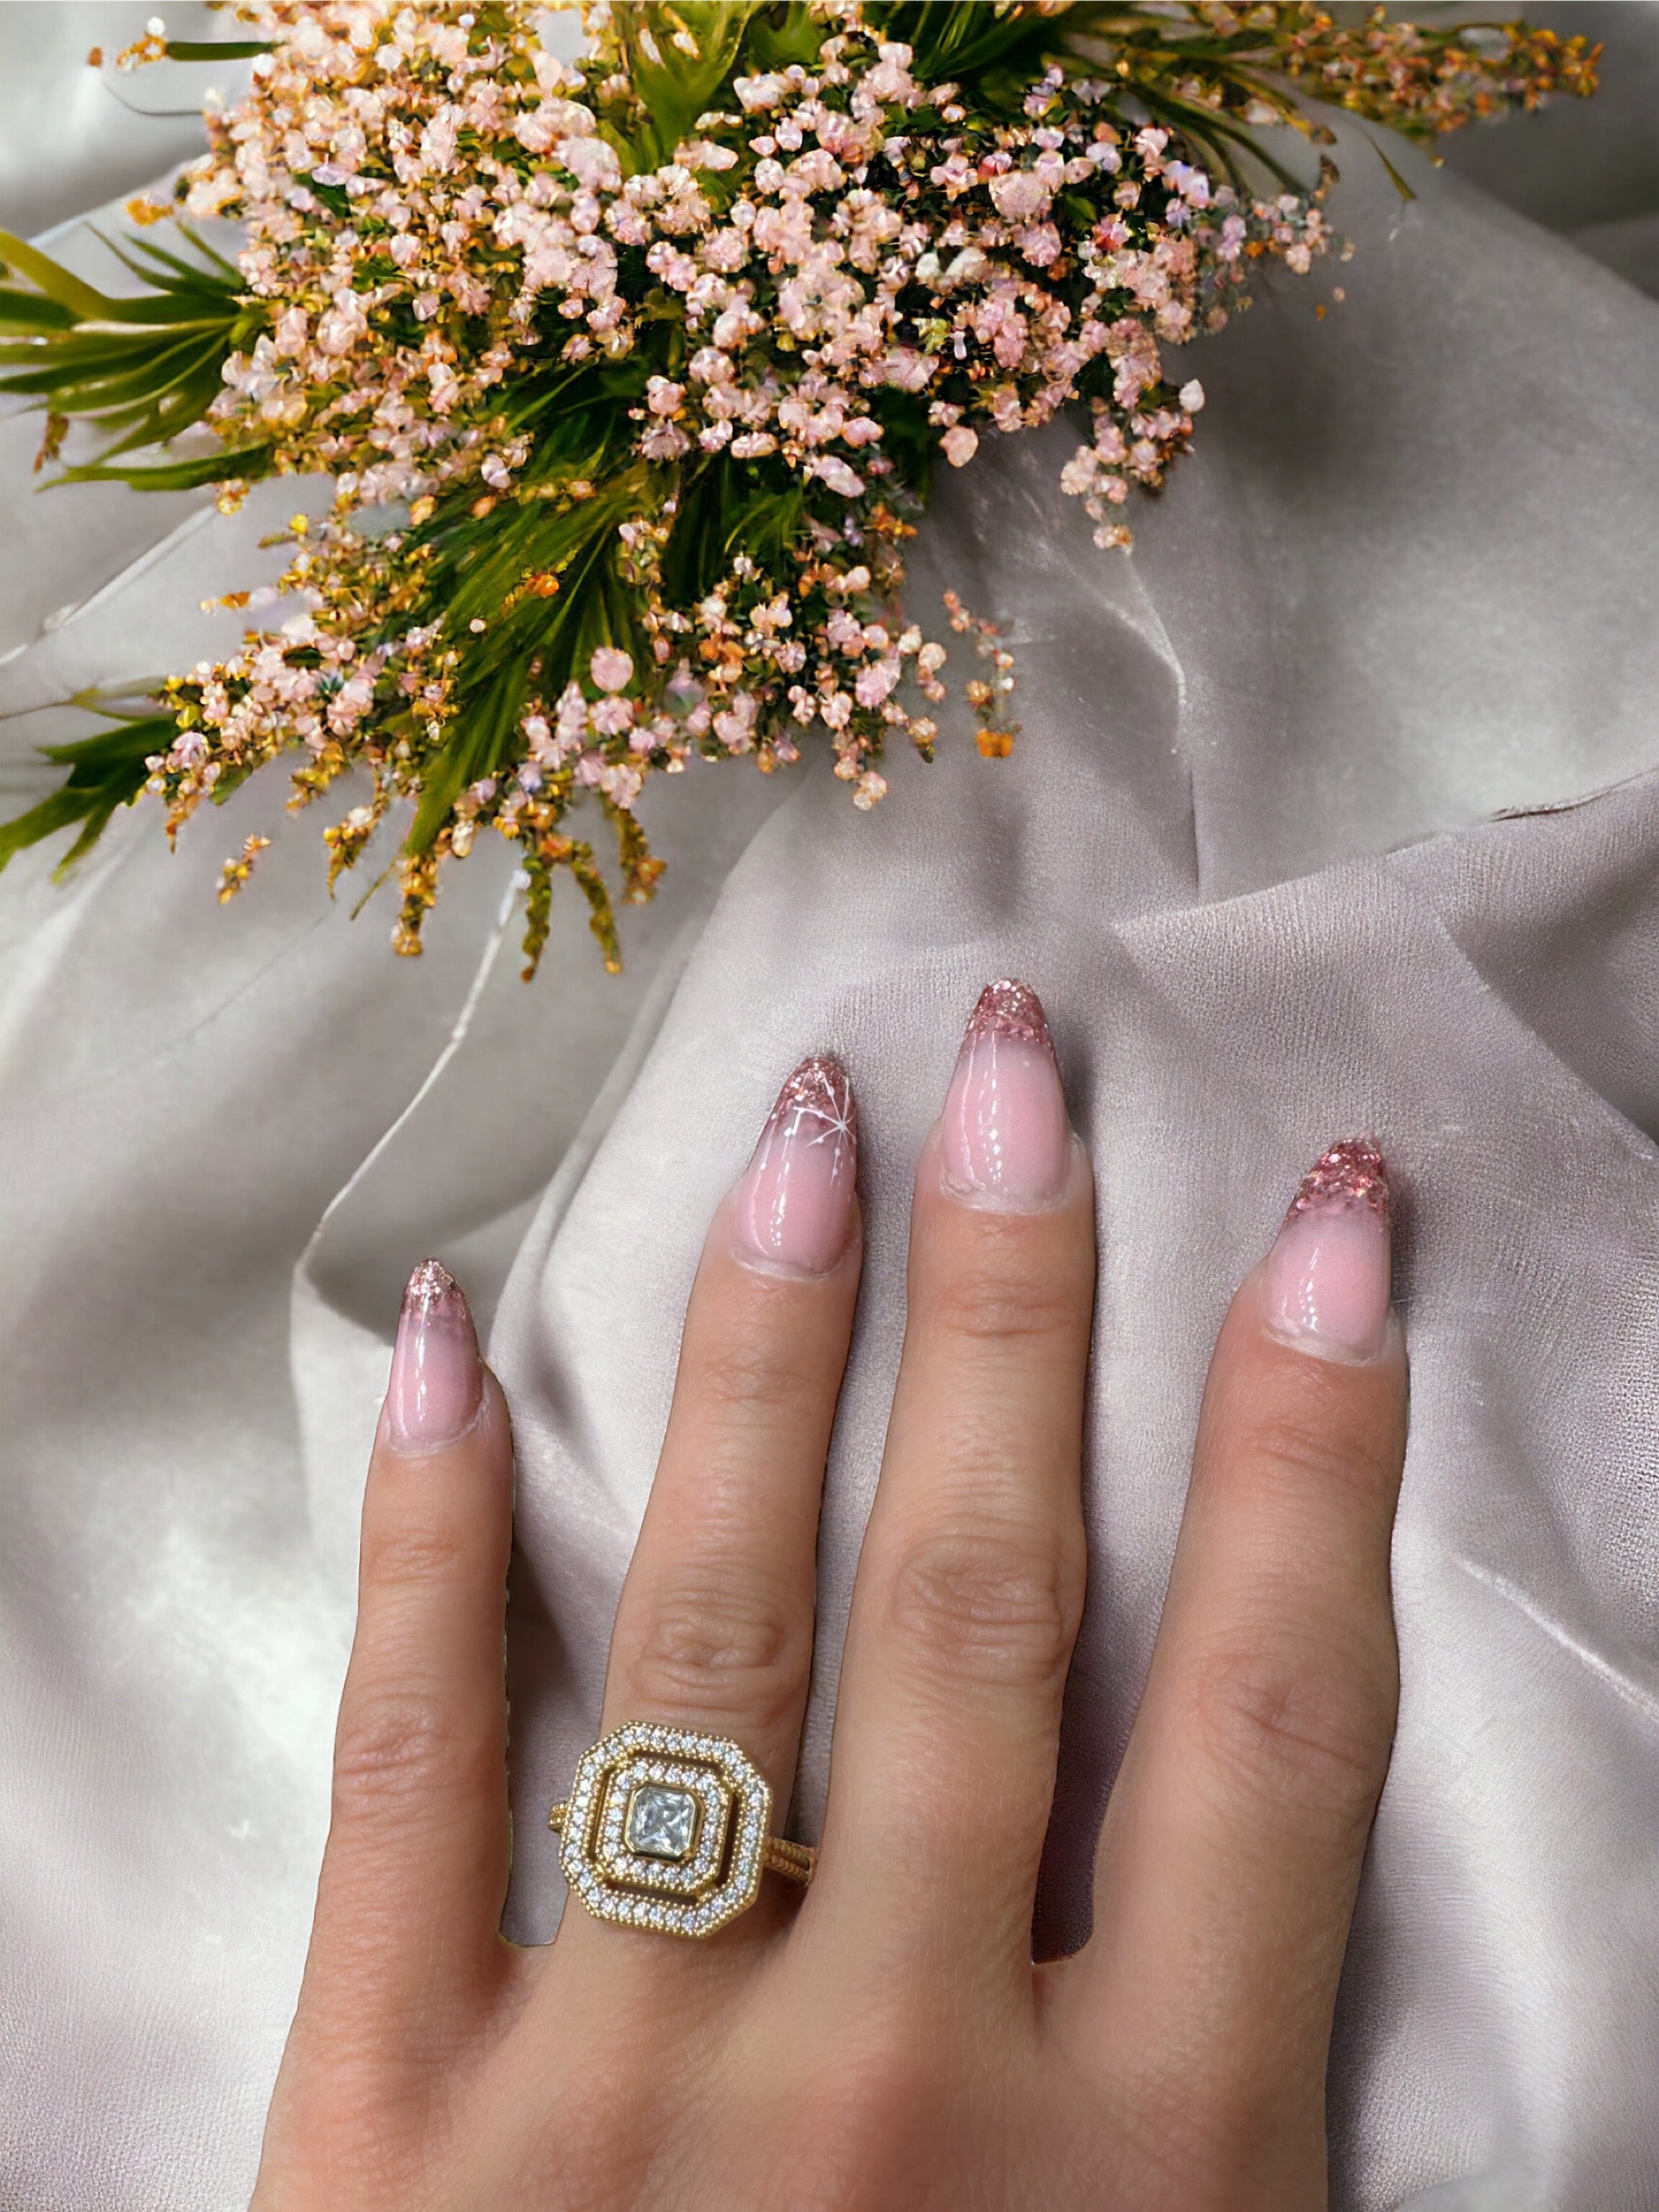 Gold-plated “Majesty” ring